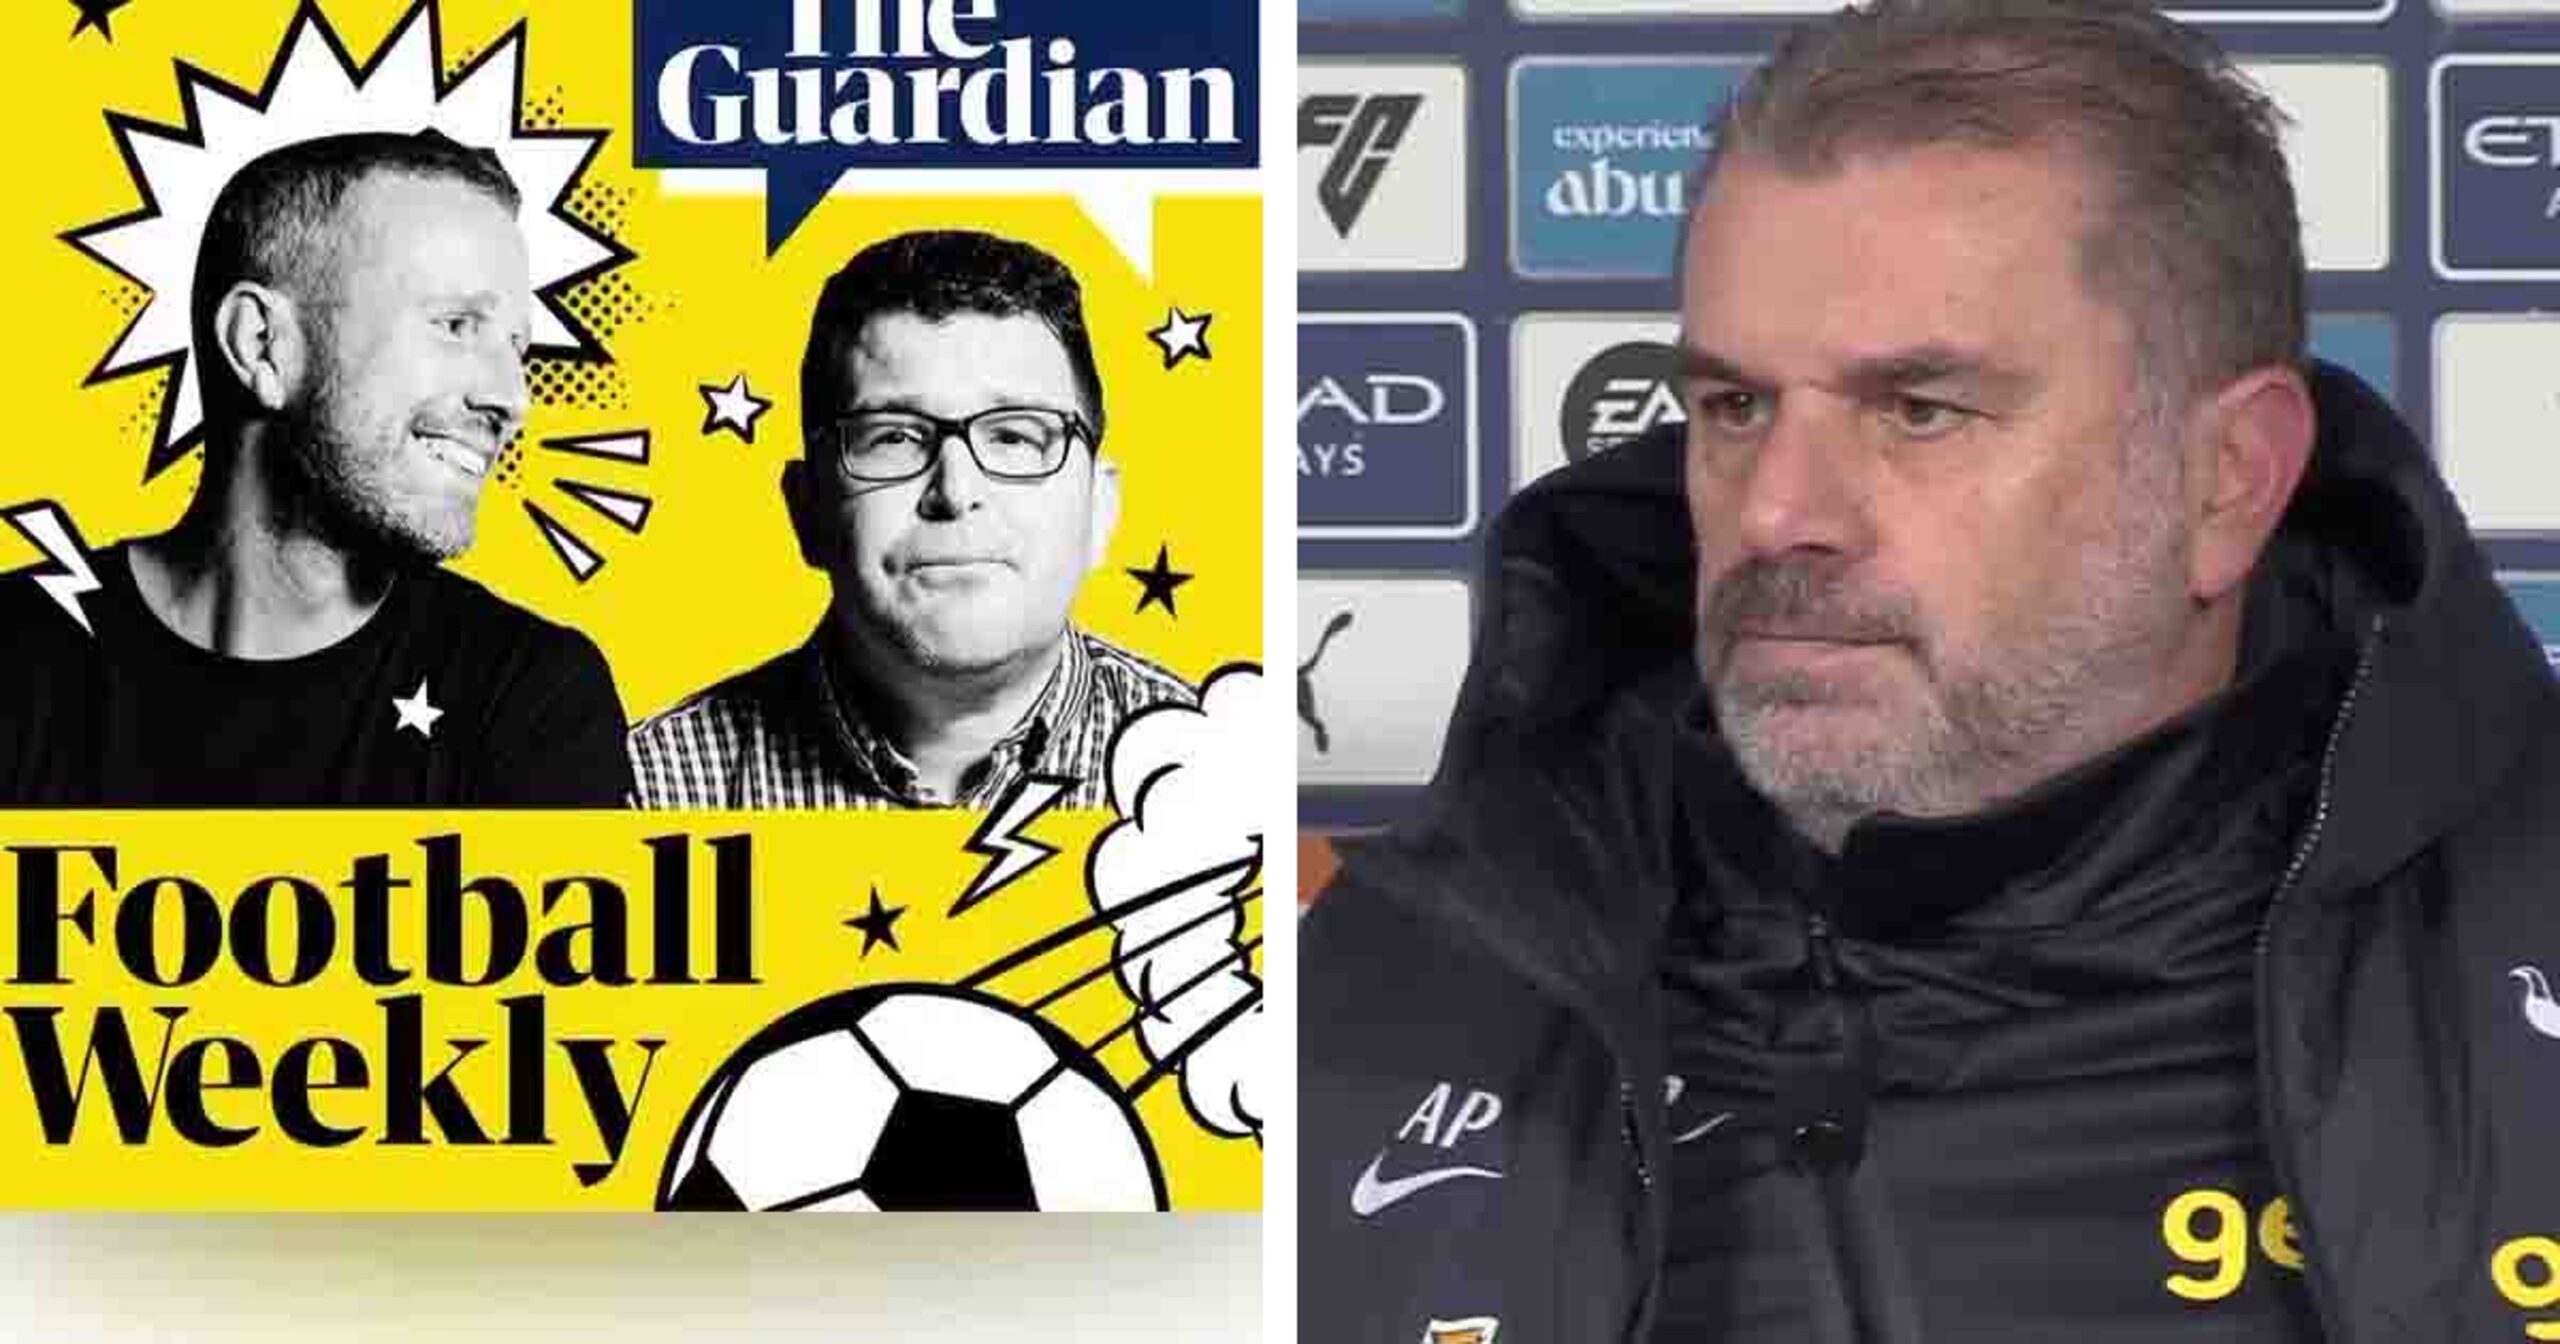 Guardian Writer Jonathan Liew Faces Backlash After Personal Attacks On Ange Postecoglou